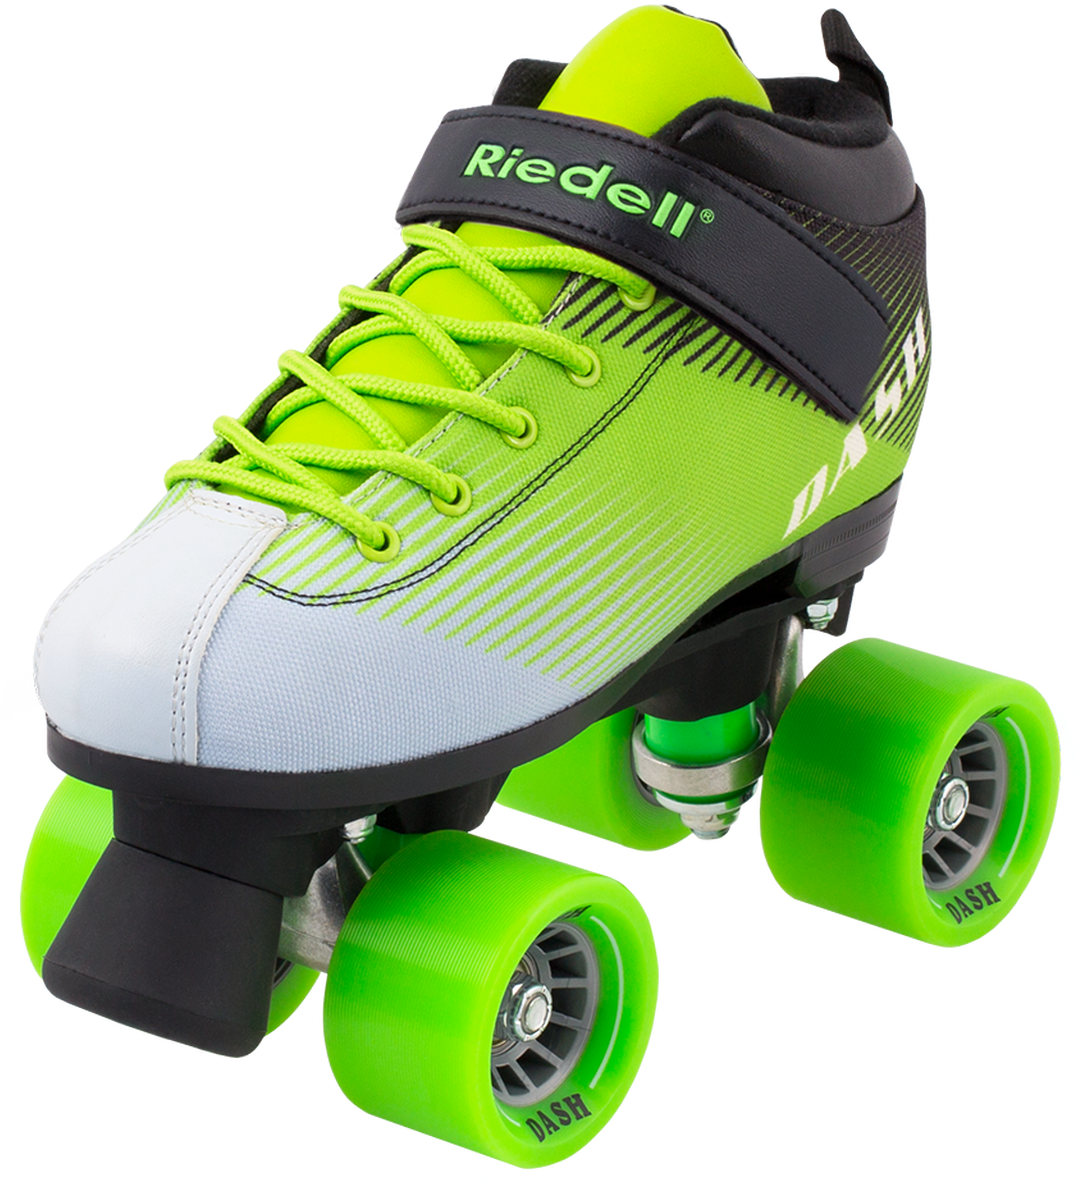 A Green And Black Roller Skate